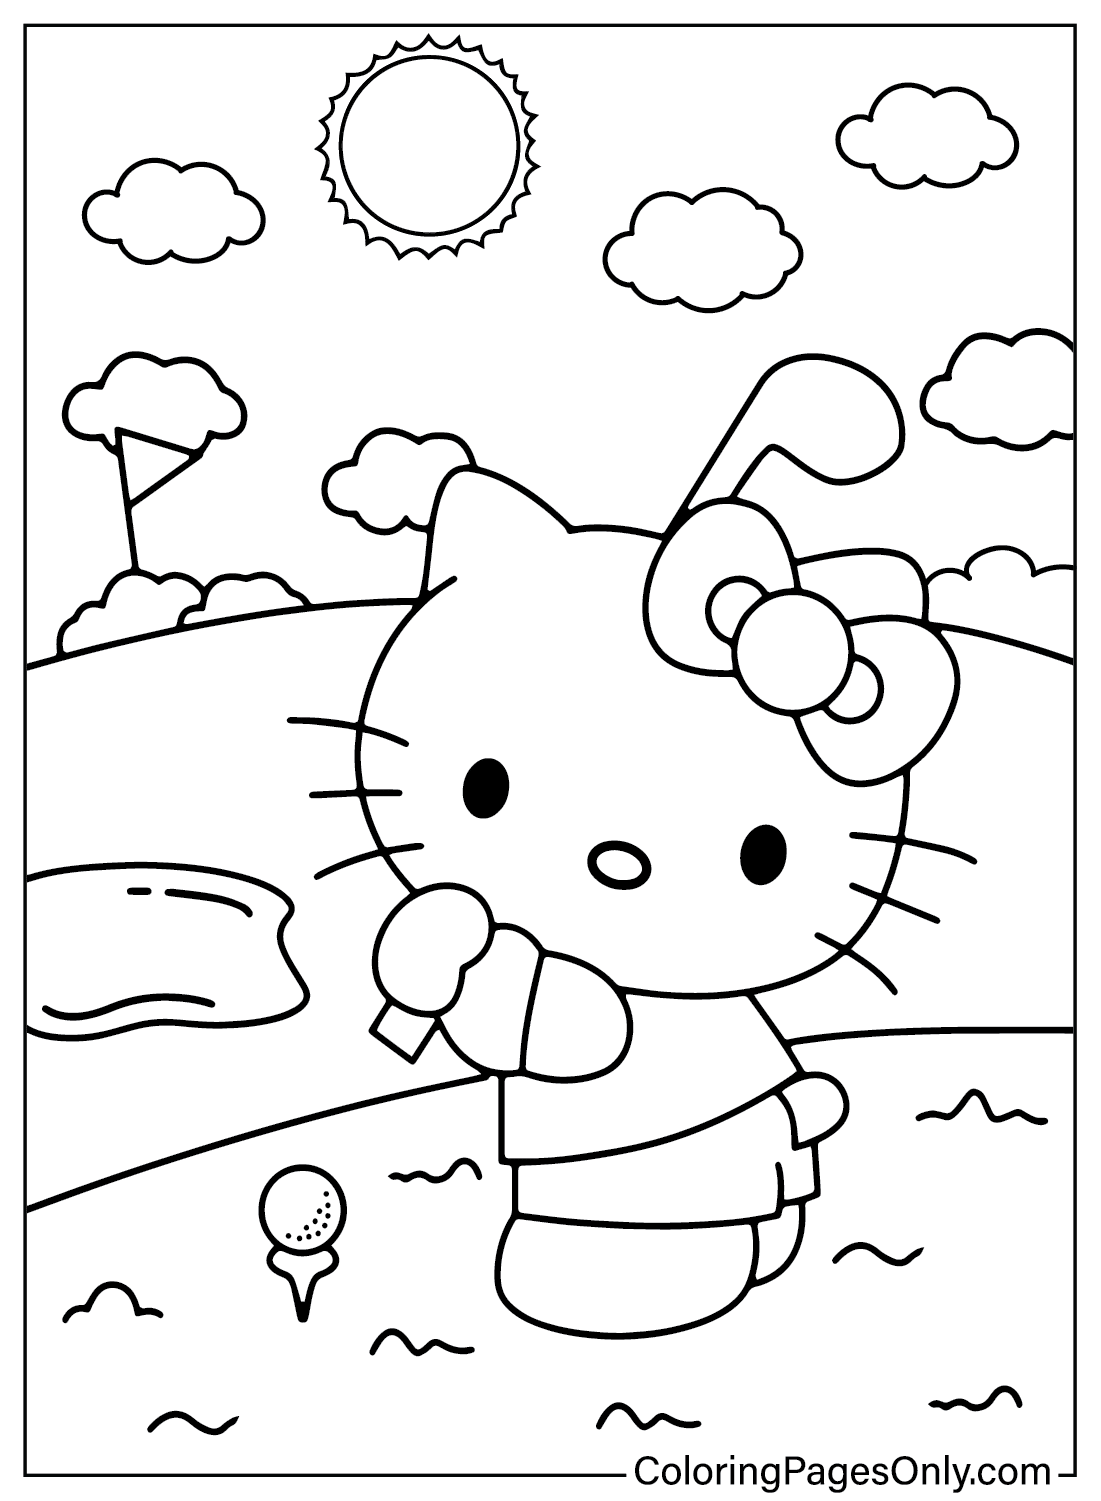 Hello Kitty Coloring Page to Print